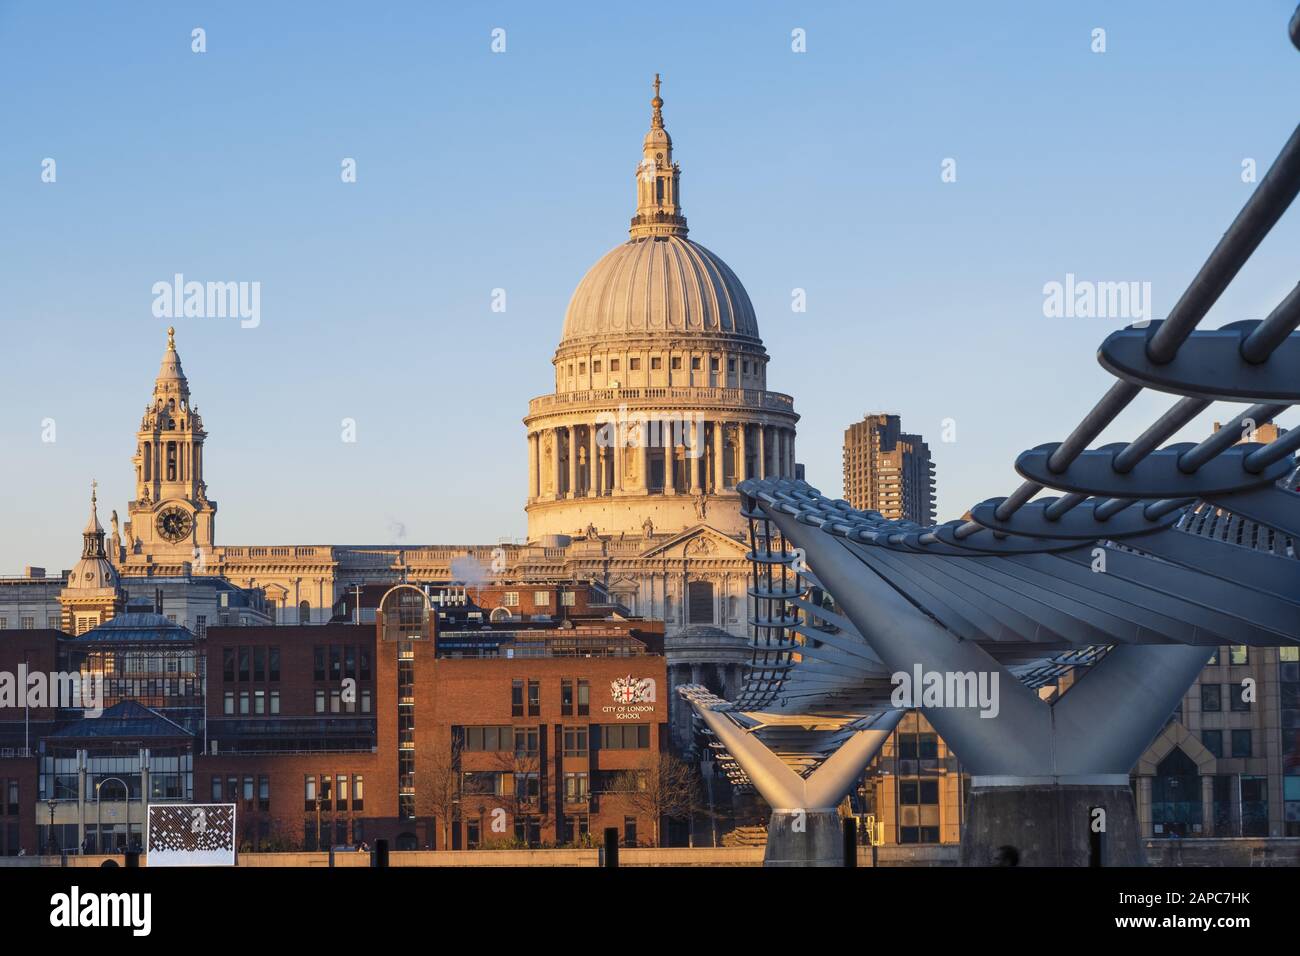 The dome of St. Paul's cathedral with the brown brick City of London private boys' school illuminated by sunlight and the Millennium pedestrian bridge Stock Photo